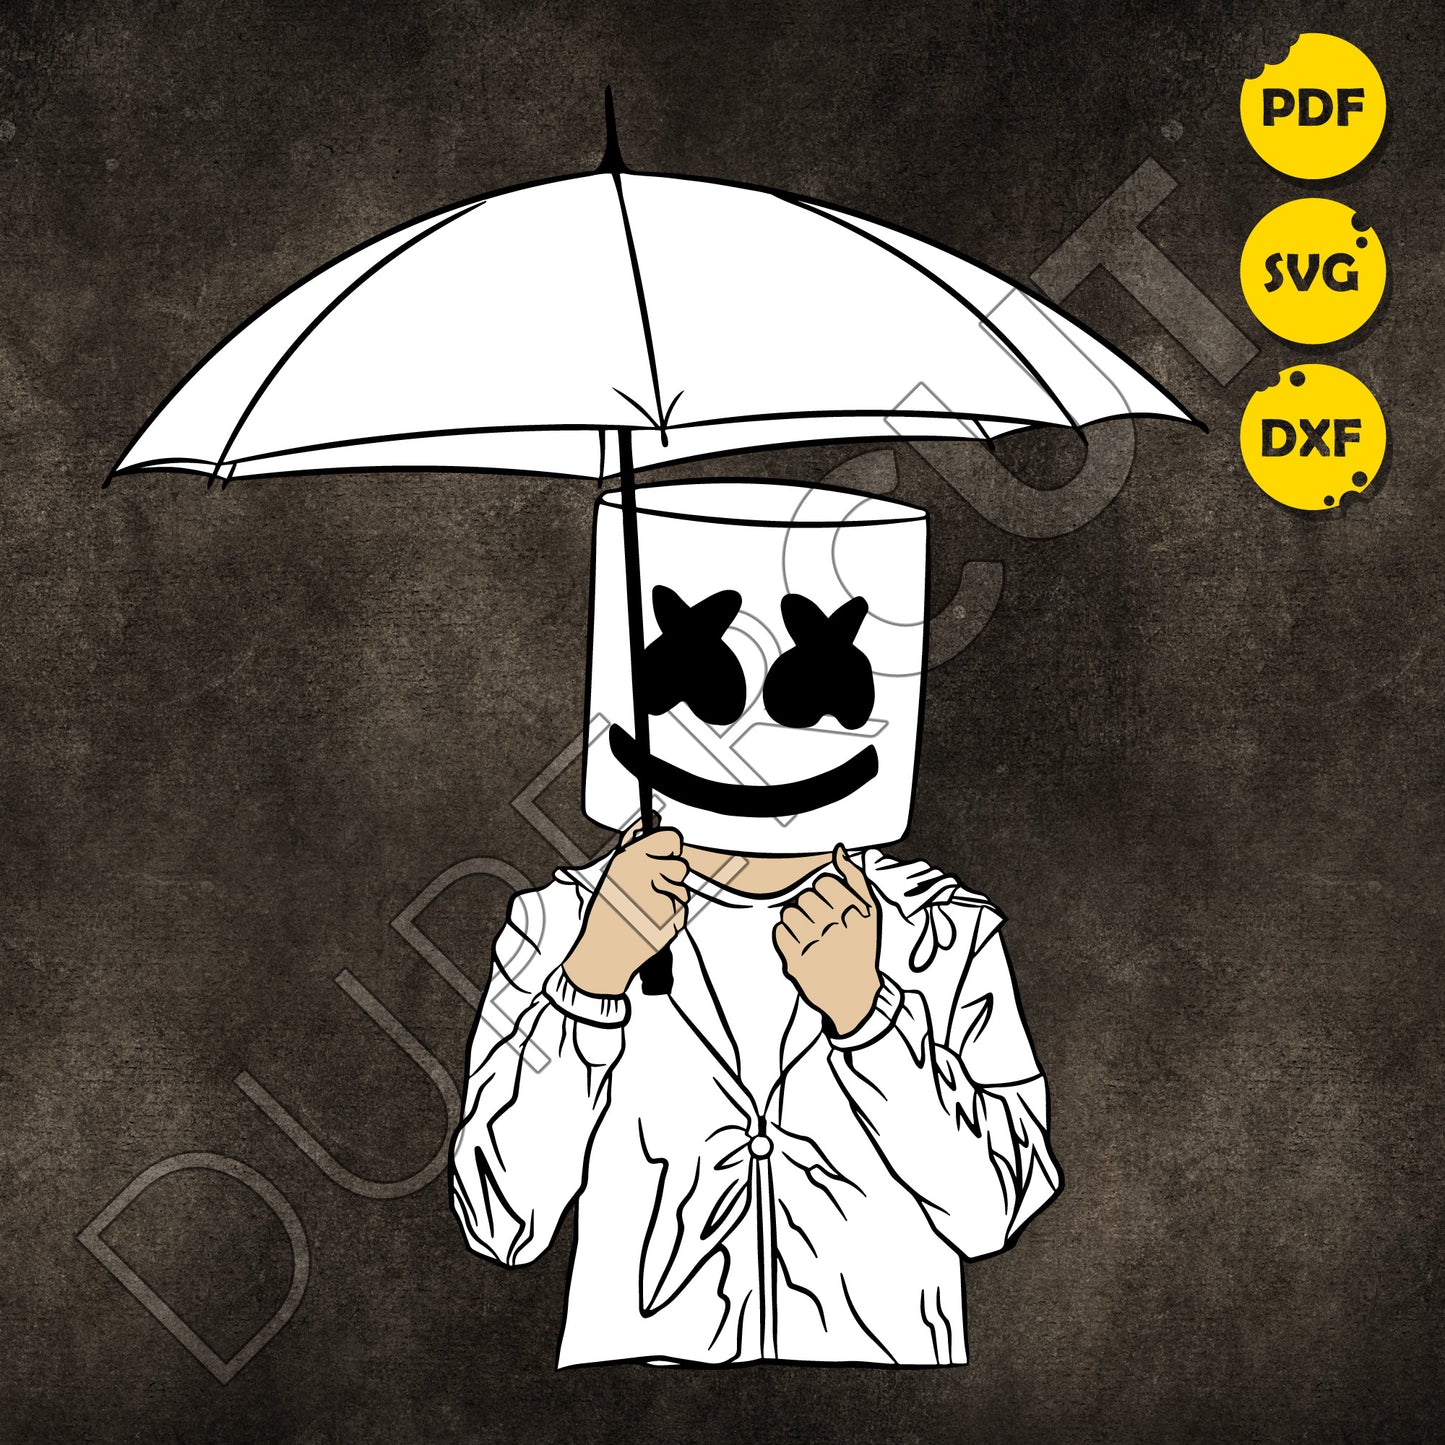 Marshmello DJ Illustration, fan art custom design. Printable SVG PNG files. For Birthday party, crafting, print and cut.